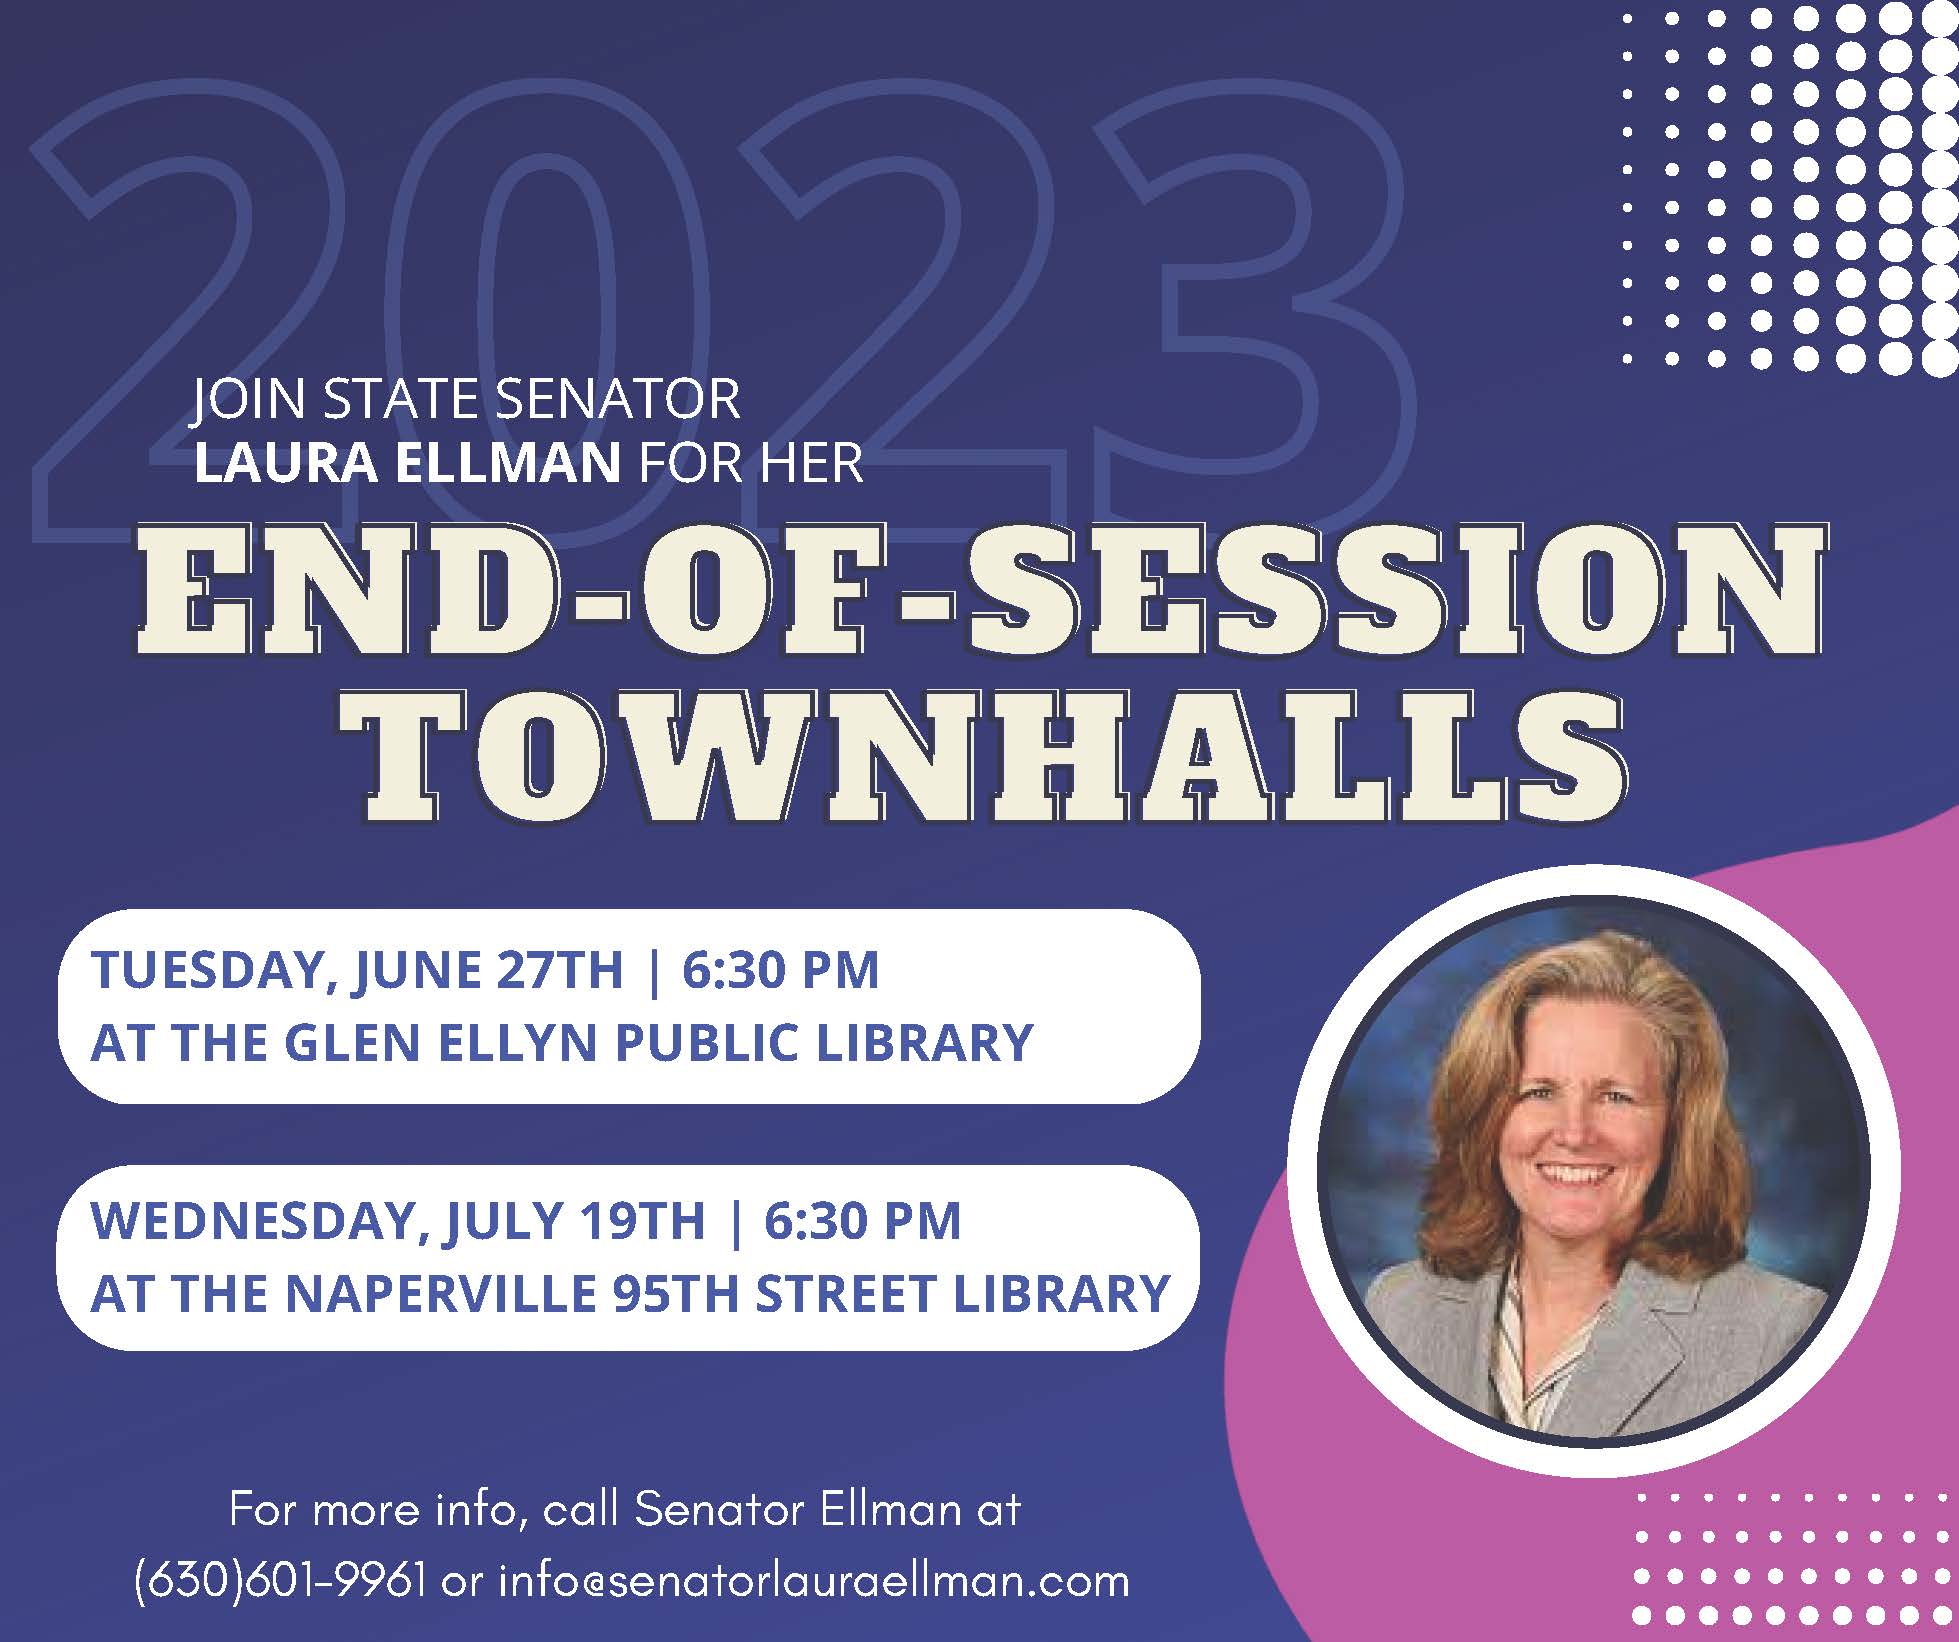 Ellman to host end of session town halls